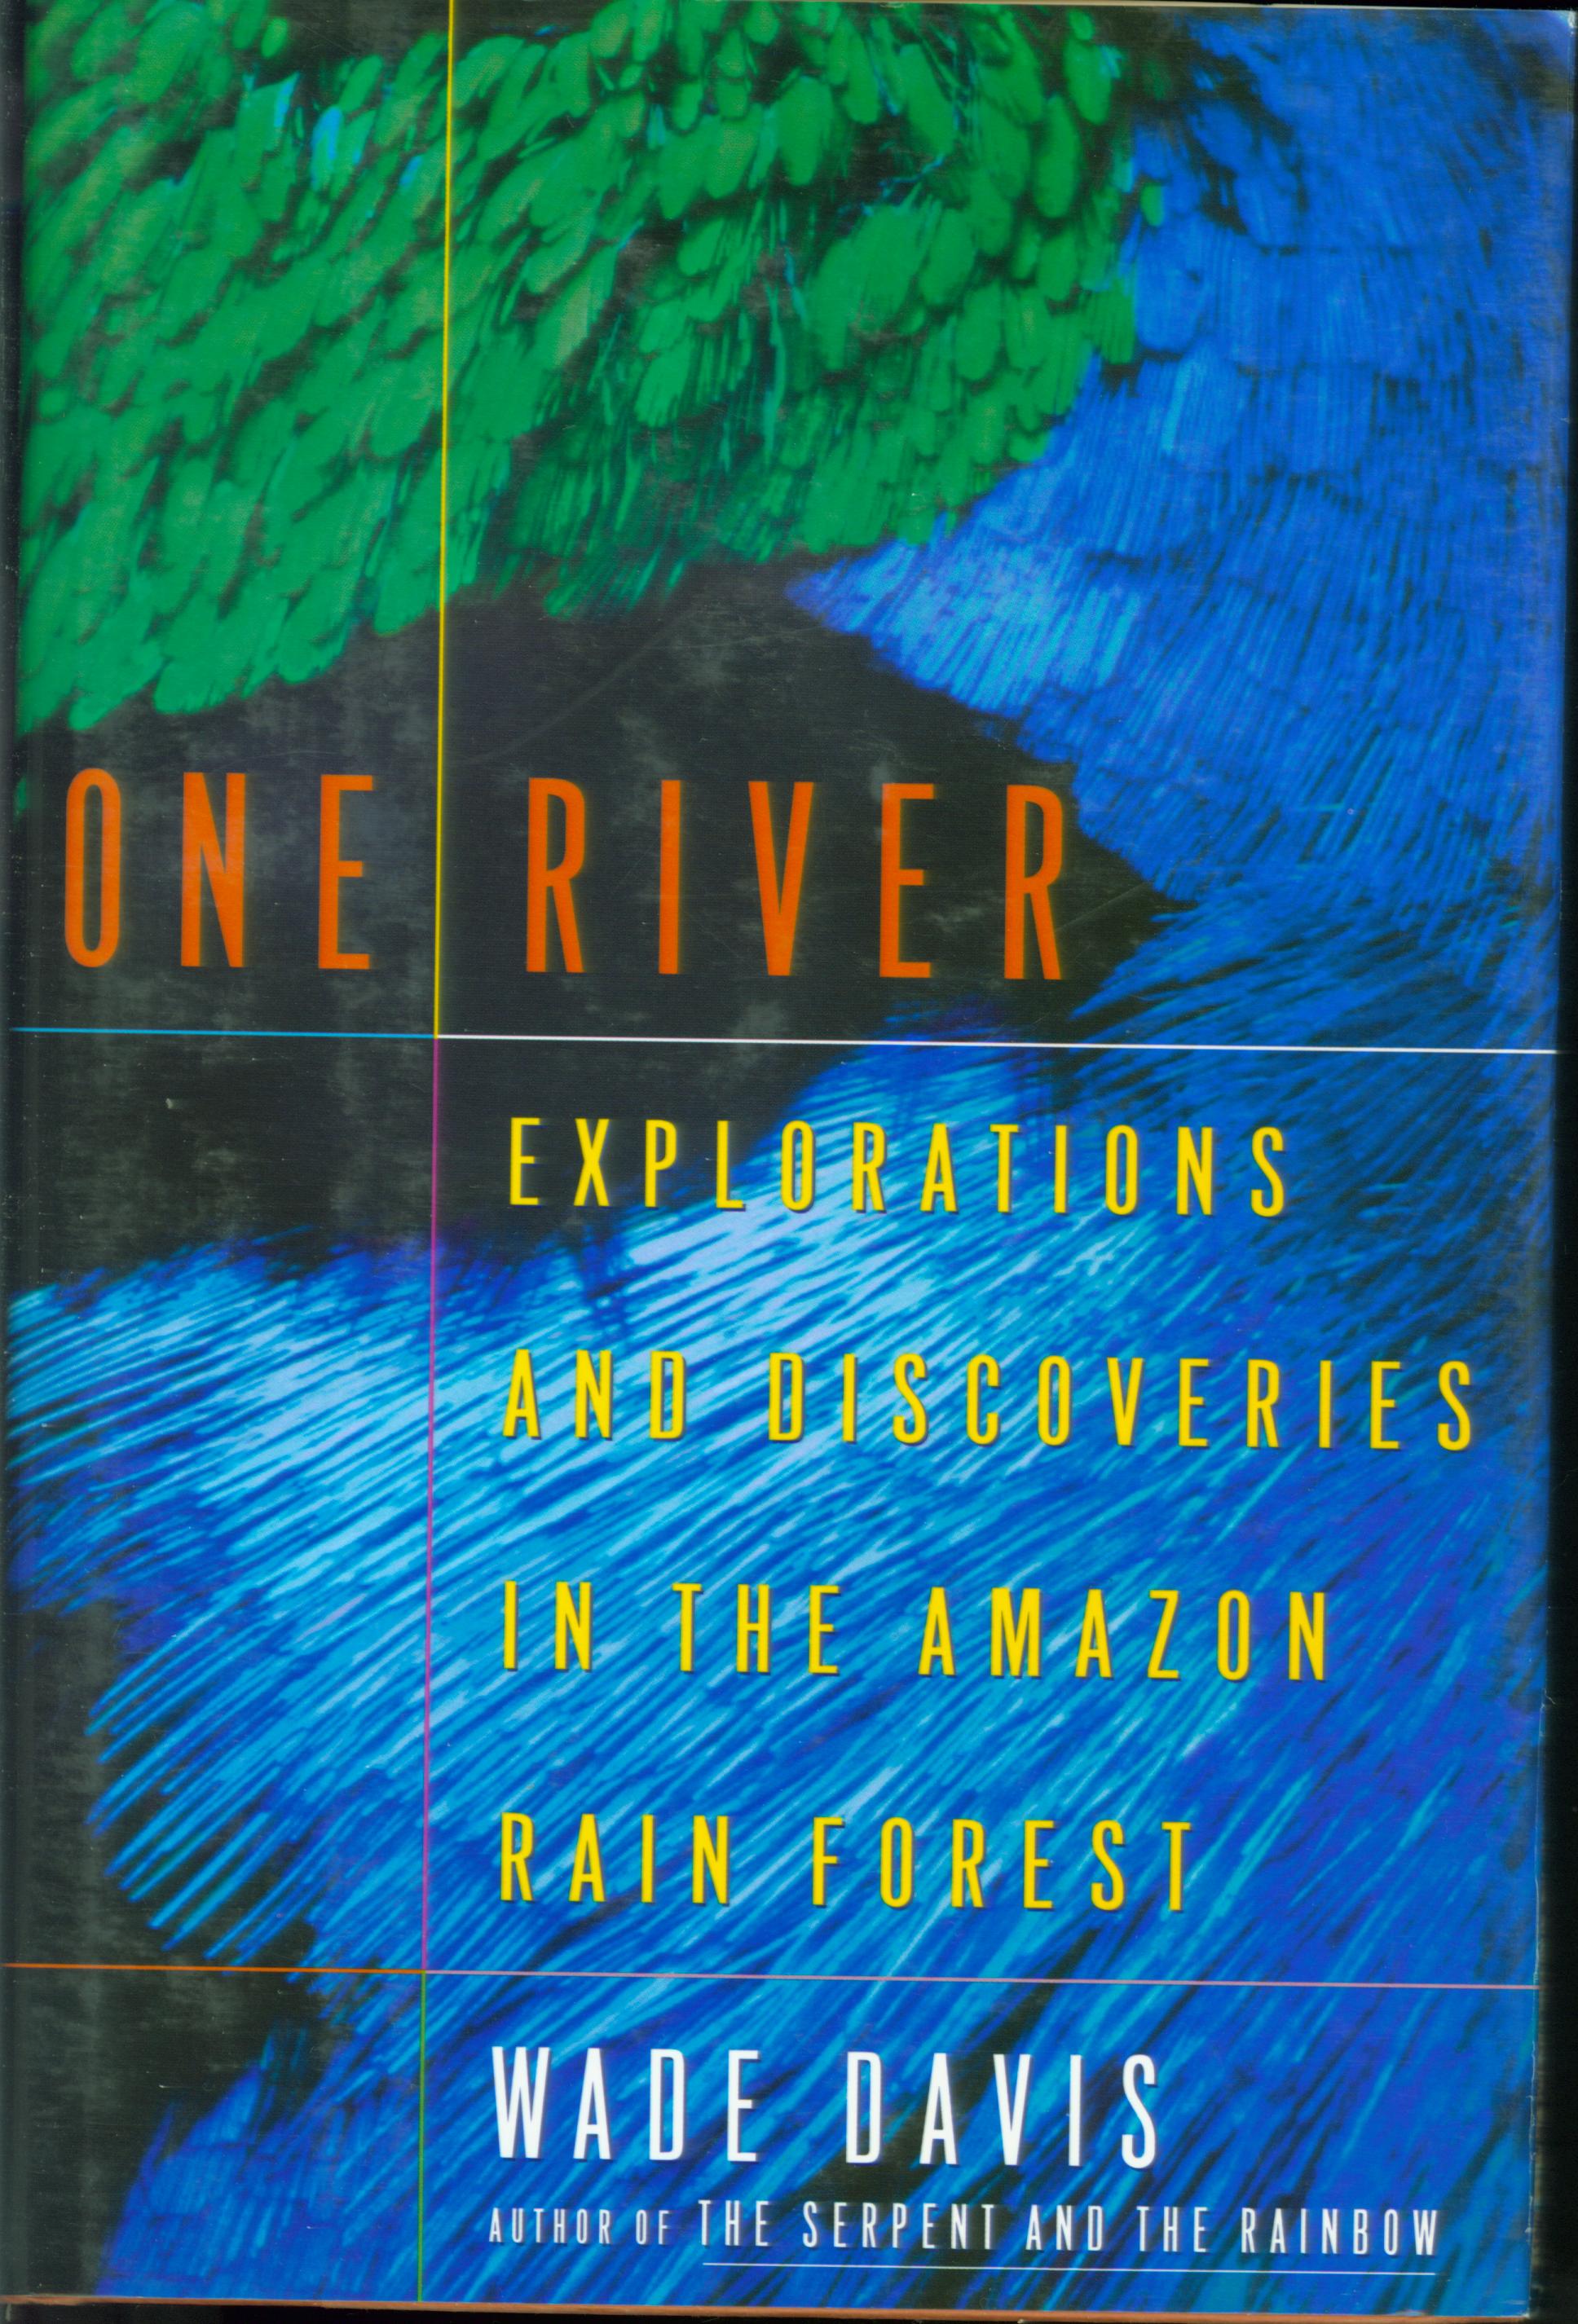 ONE RIVER: explorations and discoveries in the Amazon Rain Forest. 